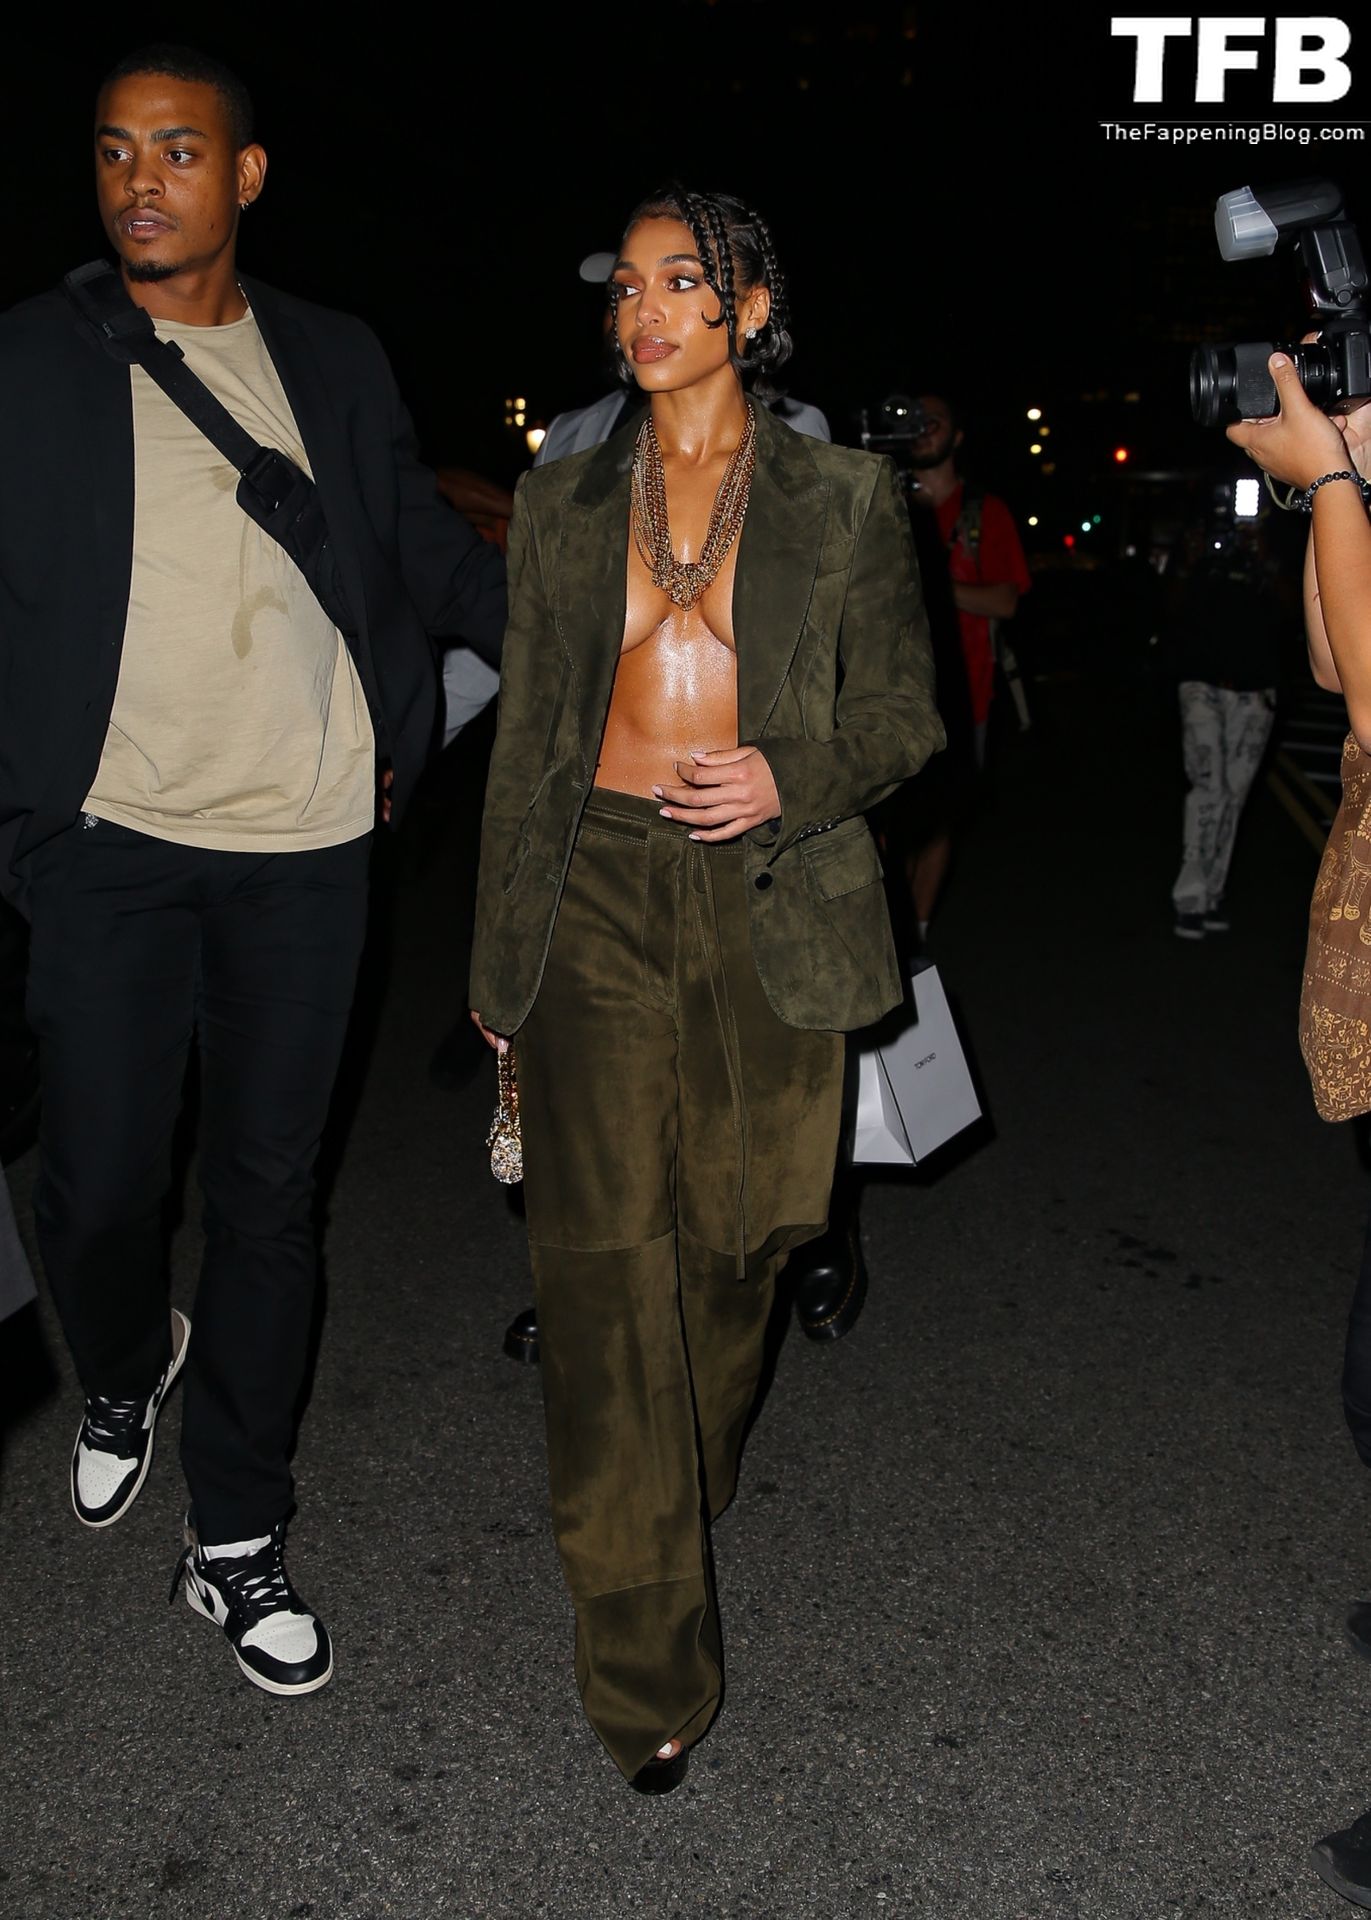 Lori Harvey Sexy The Fappening Blog 15 - Lori Harvey Shows Off Her Tits at the Tom Ford Fashion Show (38 Photos)